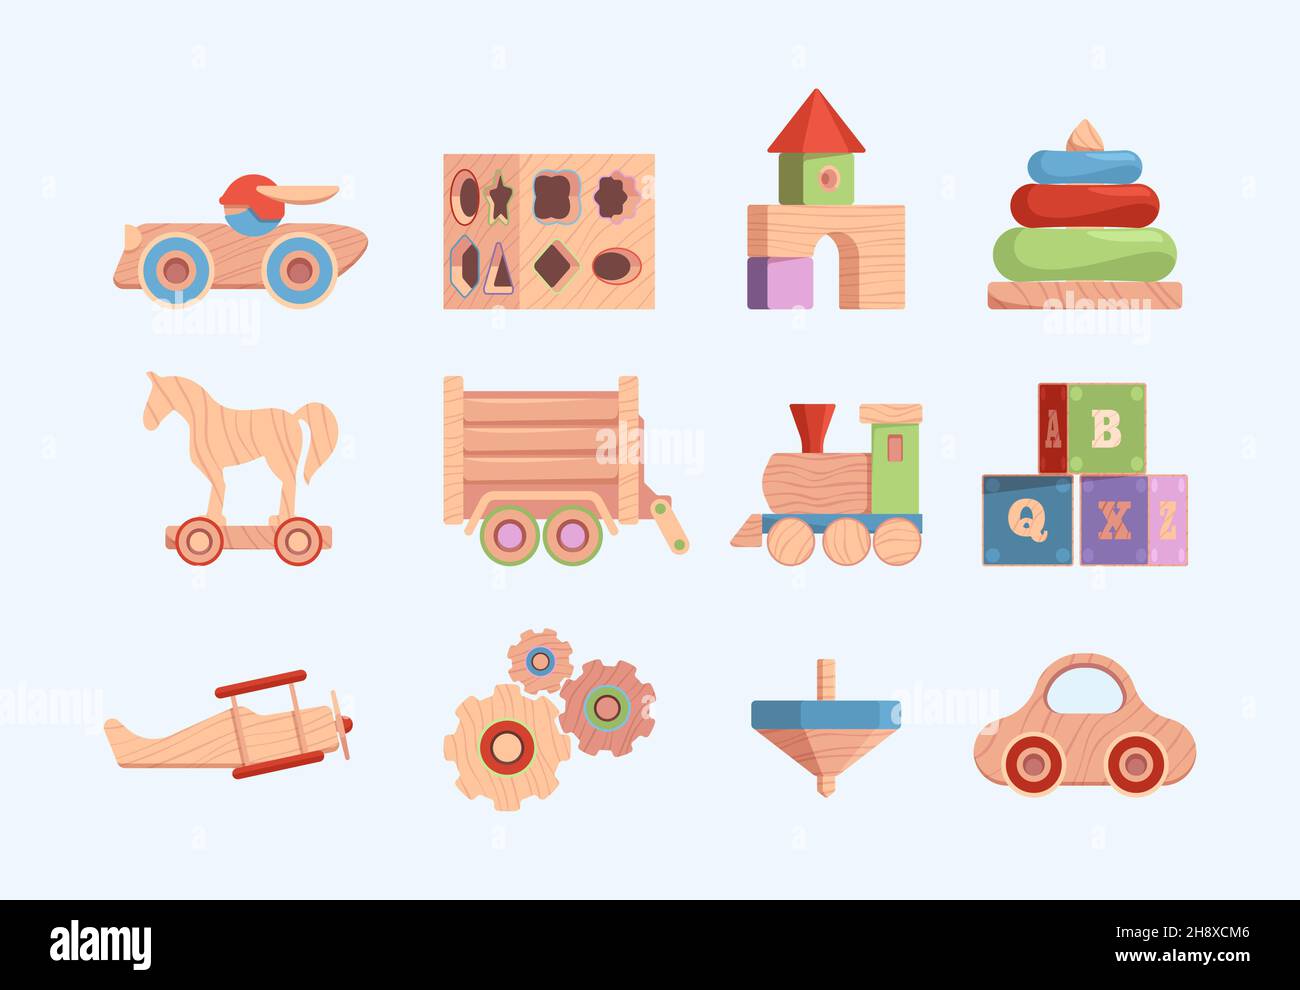 Old style wooden toy. Funny entertainments for kids vintage blocks cars soldiers garish vector illustrations set in flat style Stock Vector